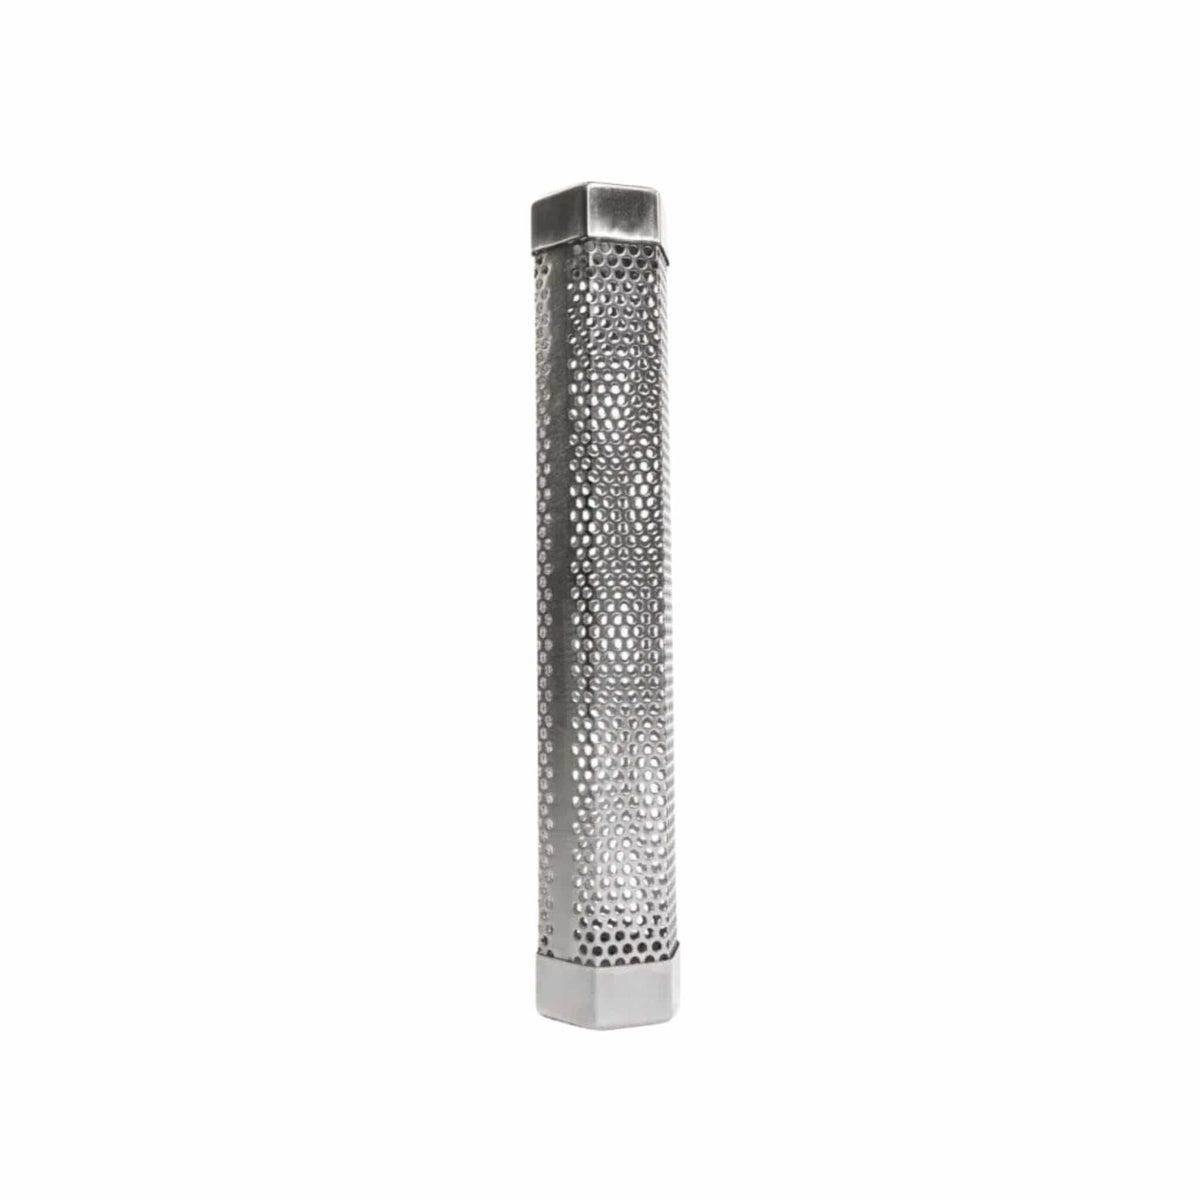 Coyote Smoker Tube for Pellet Grill